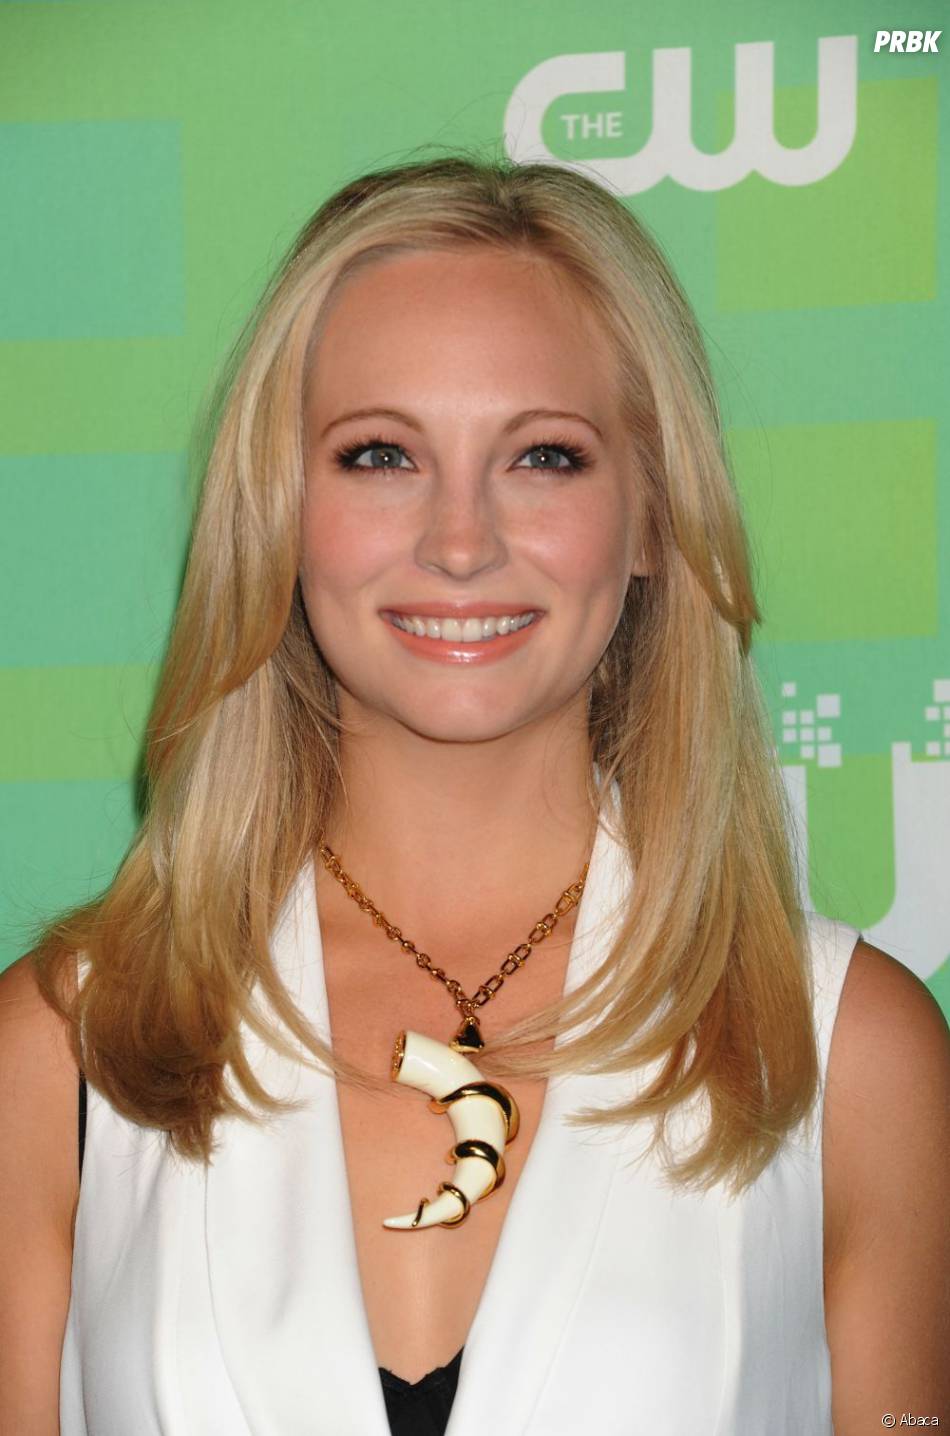 ¿Cuánto mide Candice Accola? - Real height 205222-candice-accola-950x0-1